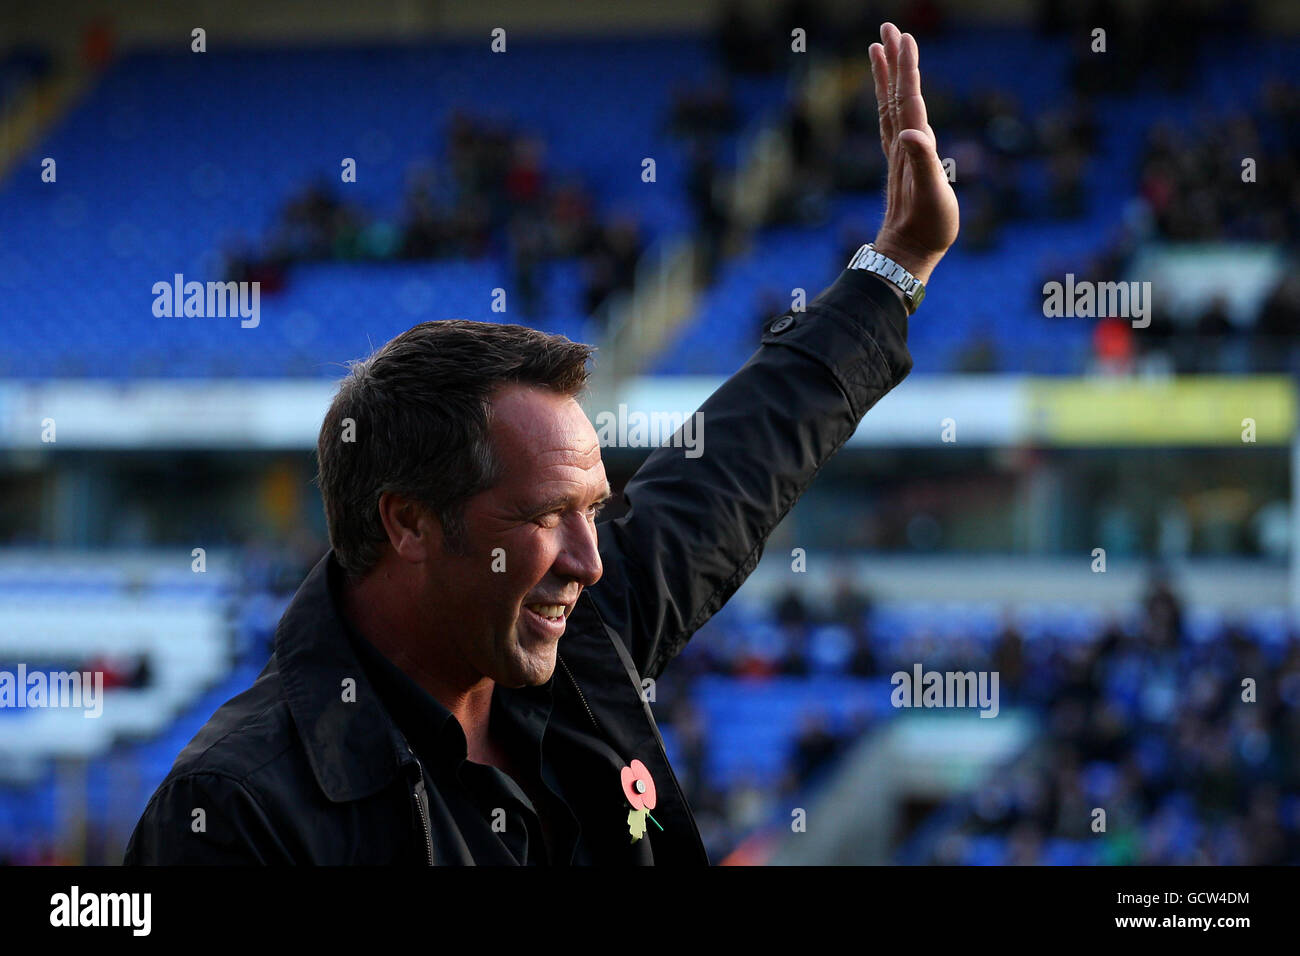 Ex Peterborough and England goalkeeper David Seaman is inducted into the Peterborough United Hall of Fame before the game during the npower League One match at London Road, Peterborough. Stock Photo